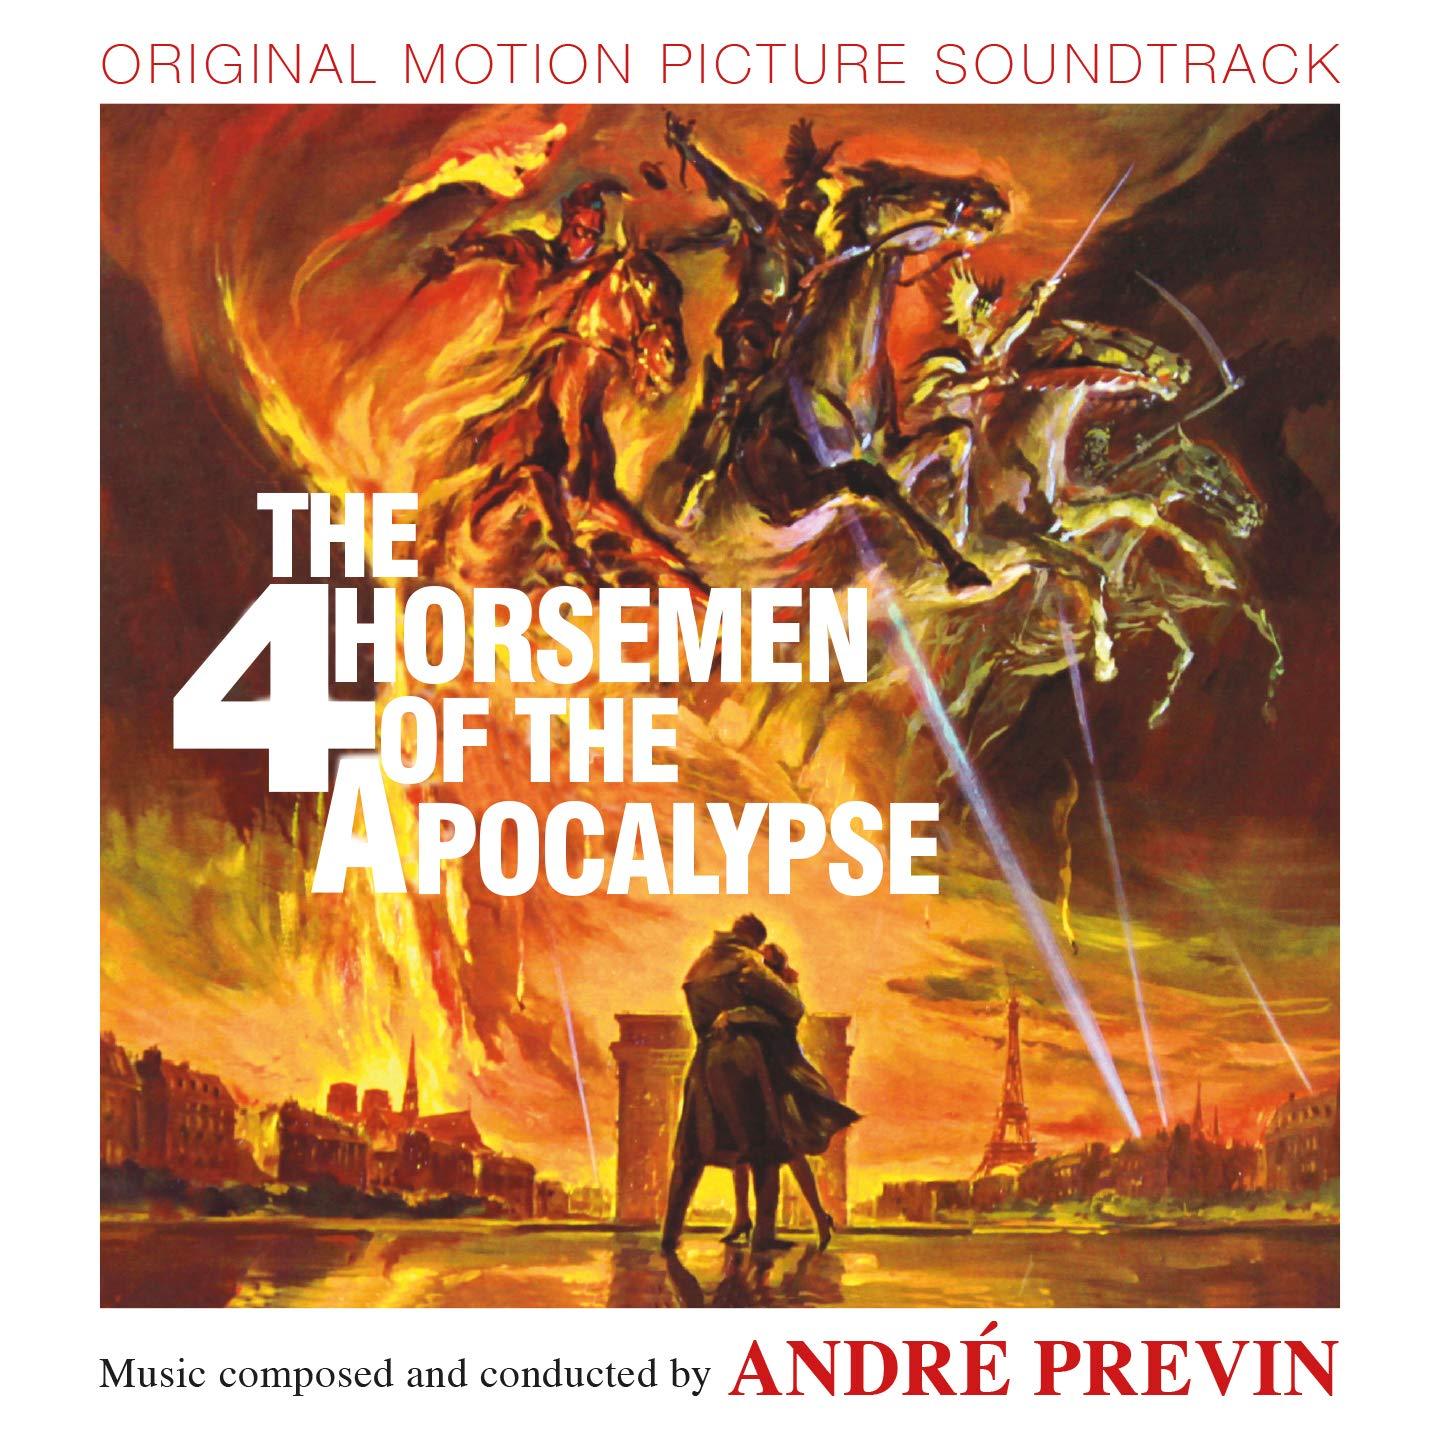 Previn, André - O.S.T - The 4 Horsemen of the Apocalypse